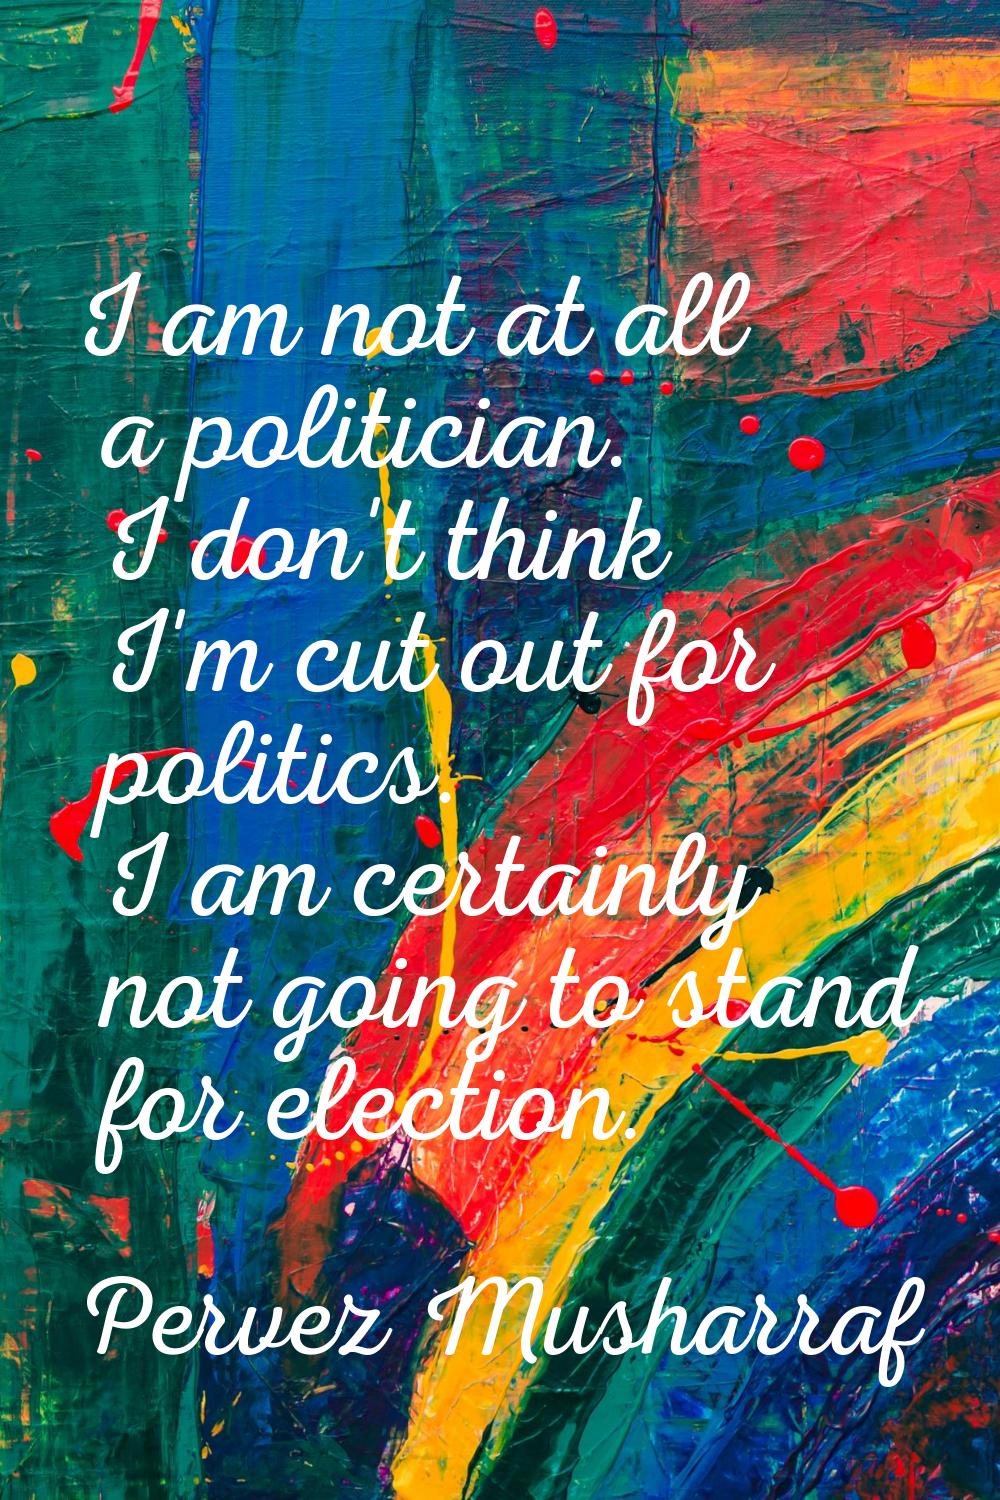 I am not at all a politician. I don't think I'm cut out for politics. I am certainly not going to s